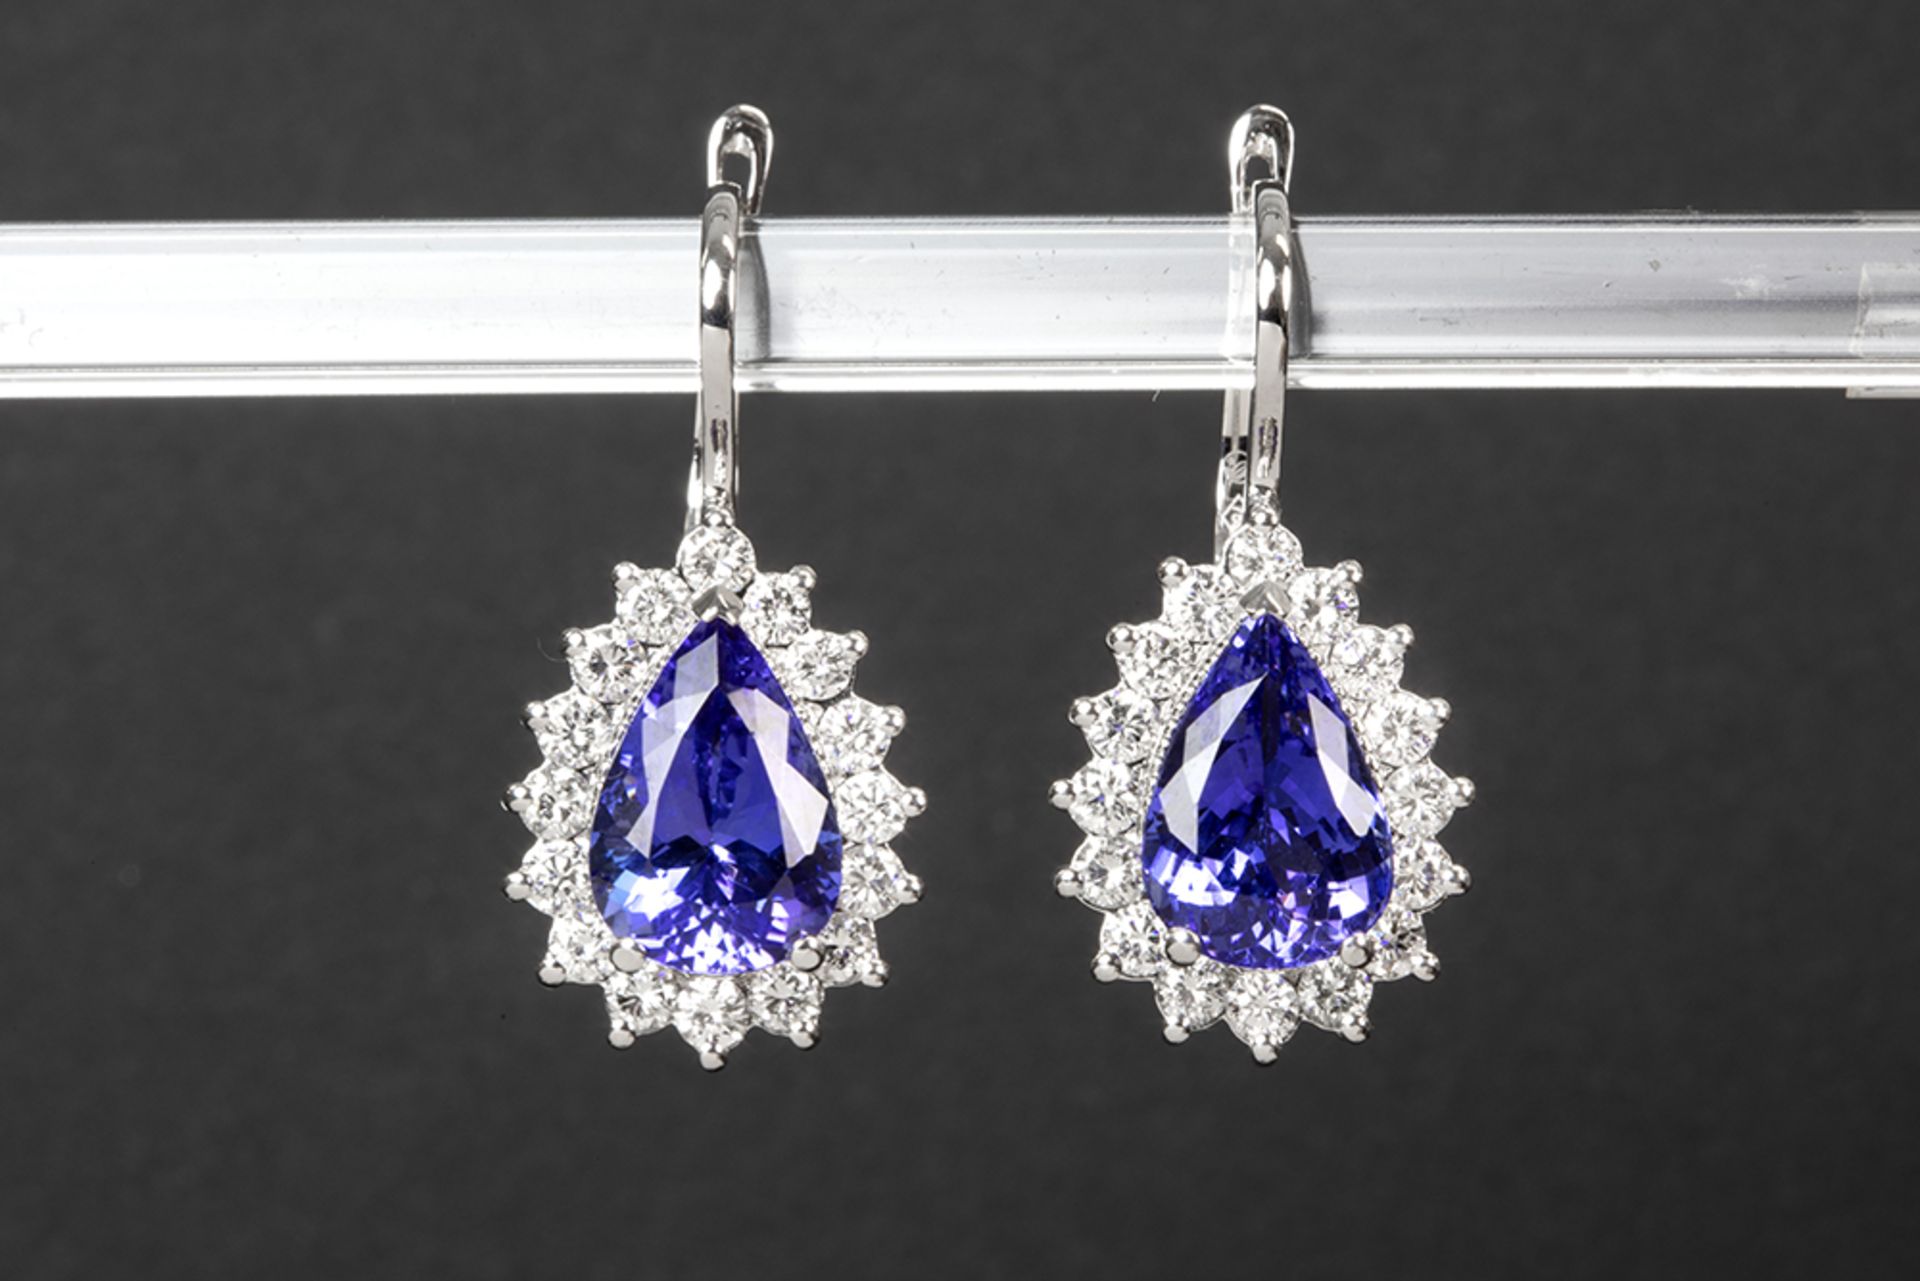 pair of elegant earrings in white gold (18 carat) with ca 6 carat of tanzanite with beautiful